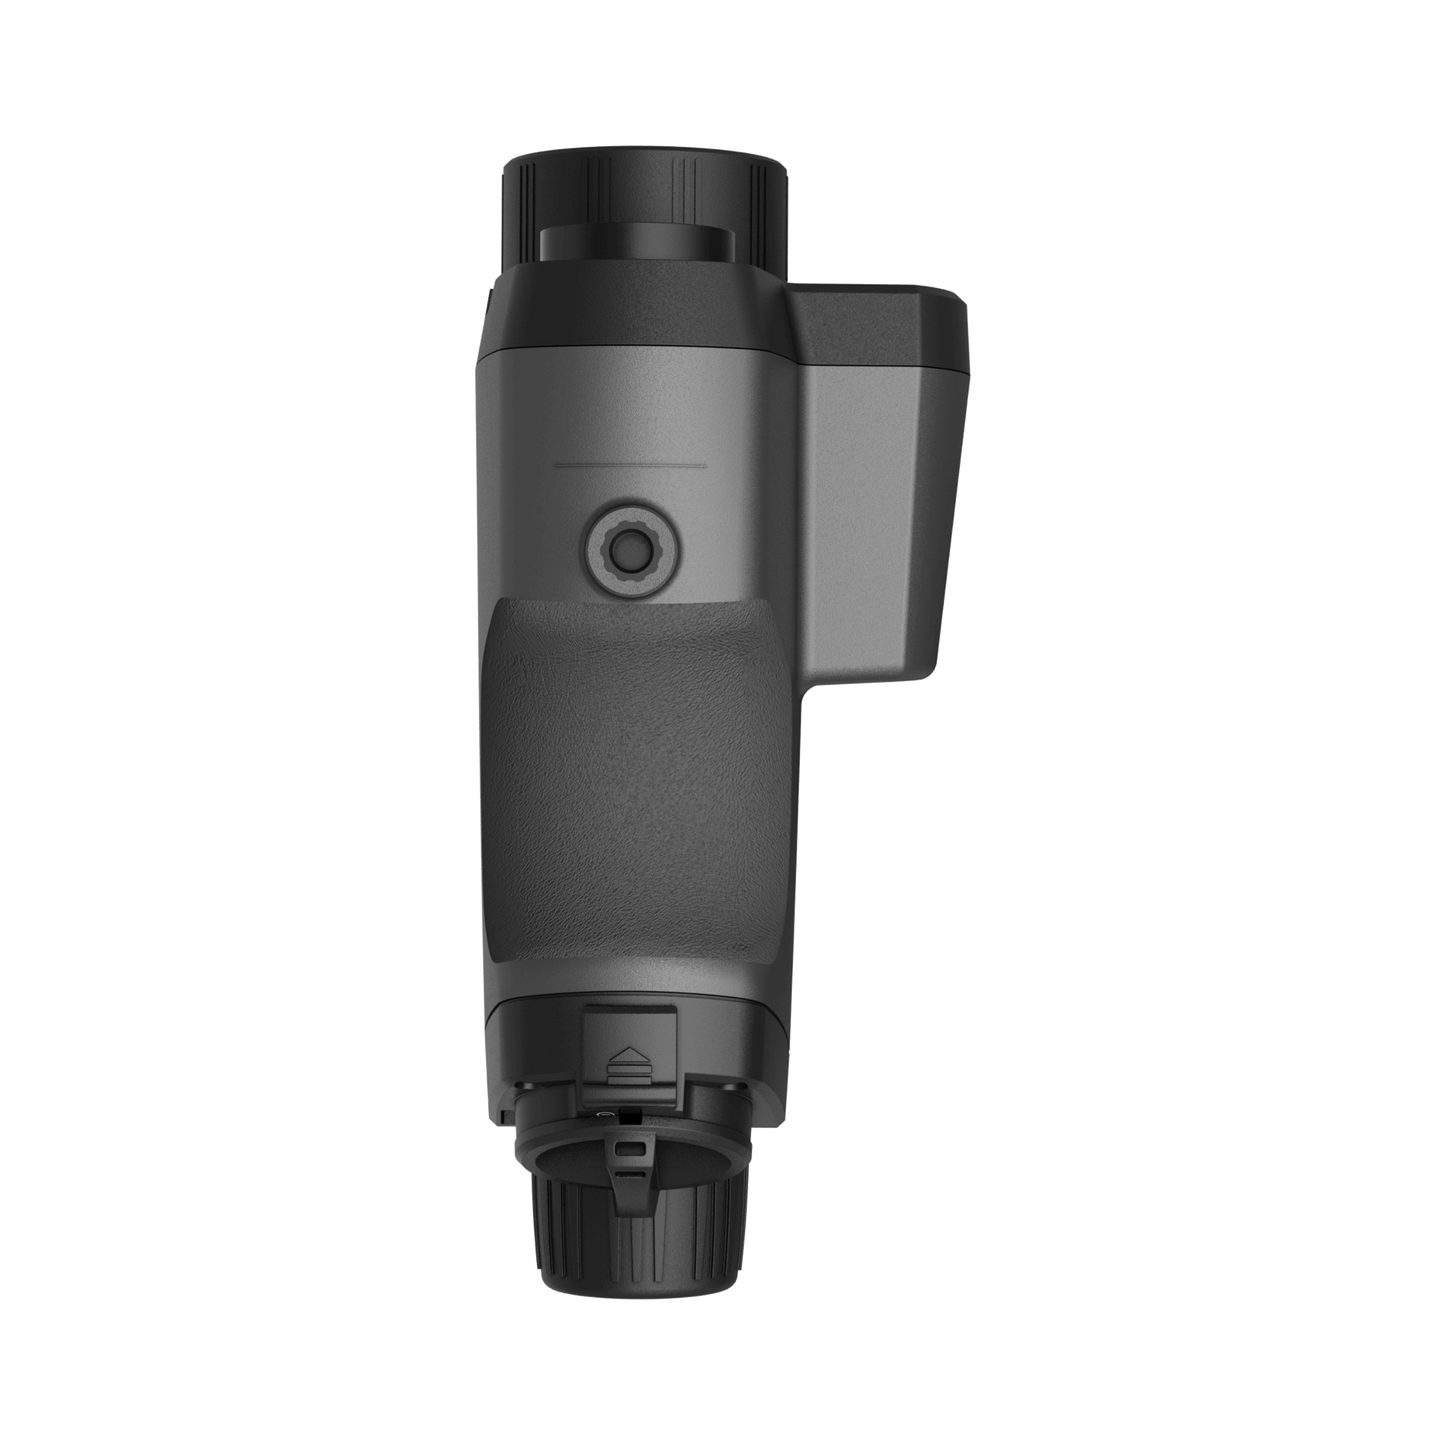 Cape Thermal imaging monocular for sale - HikMicro Gryphon GH35L Handheld thermal monocular bottom view with tripod and accessory mount